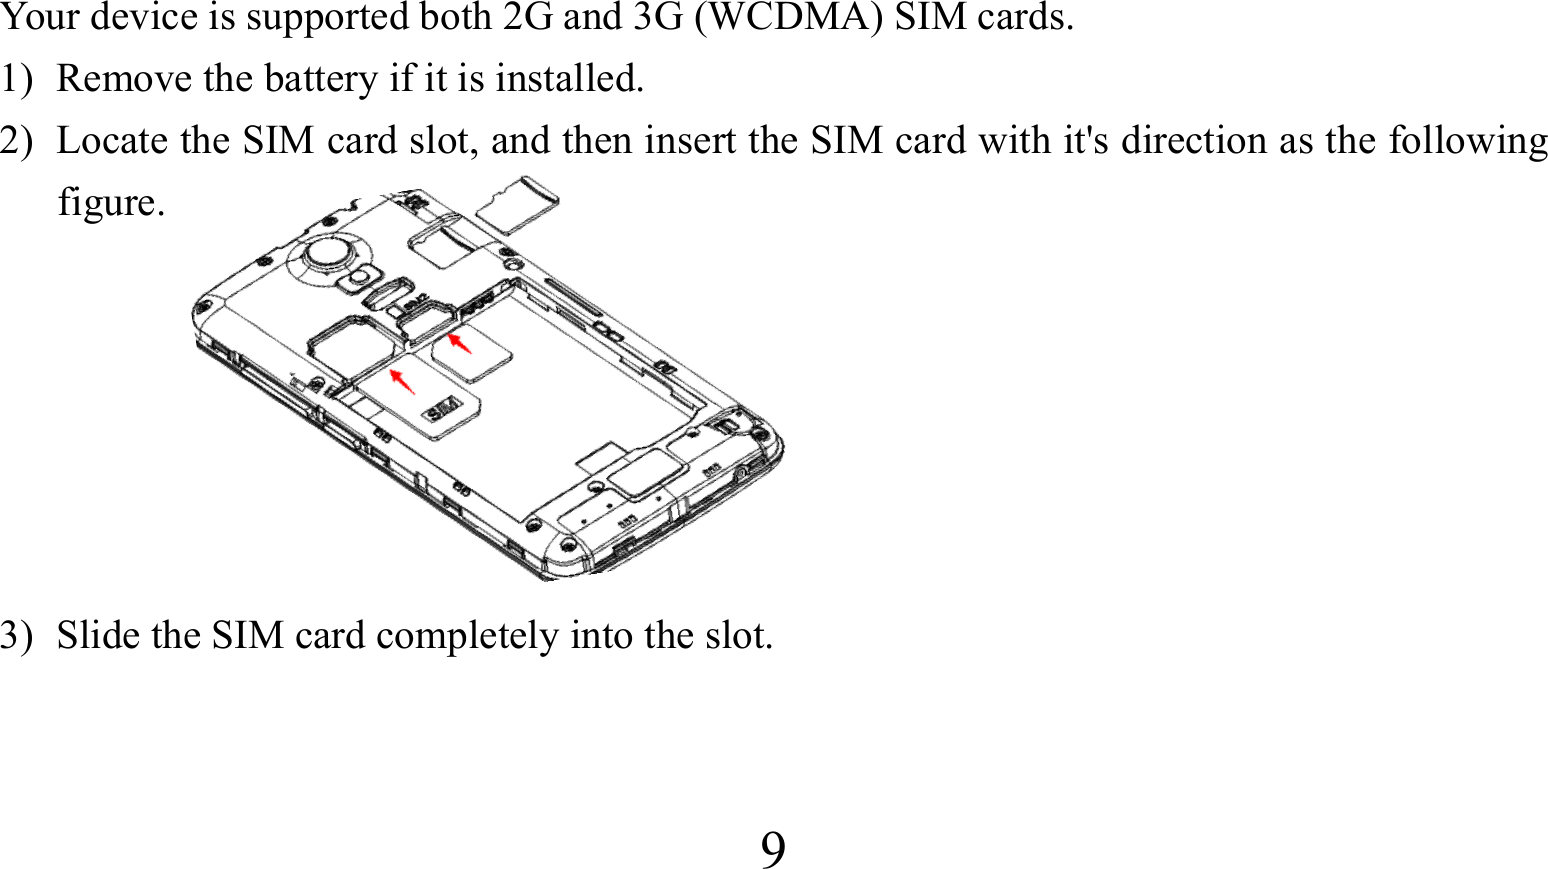  9Your device is supported both 2G and 3G (WCDMA) SIM cards. 1) Remove the battery if it is installed. 2) Locate the SIM card slot, and then insert the SIM card with it&apos;s direction as the following figure.       3) Slide the SIM card completely into the slot.  